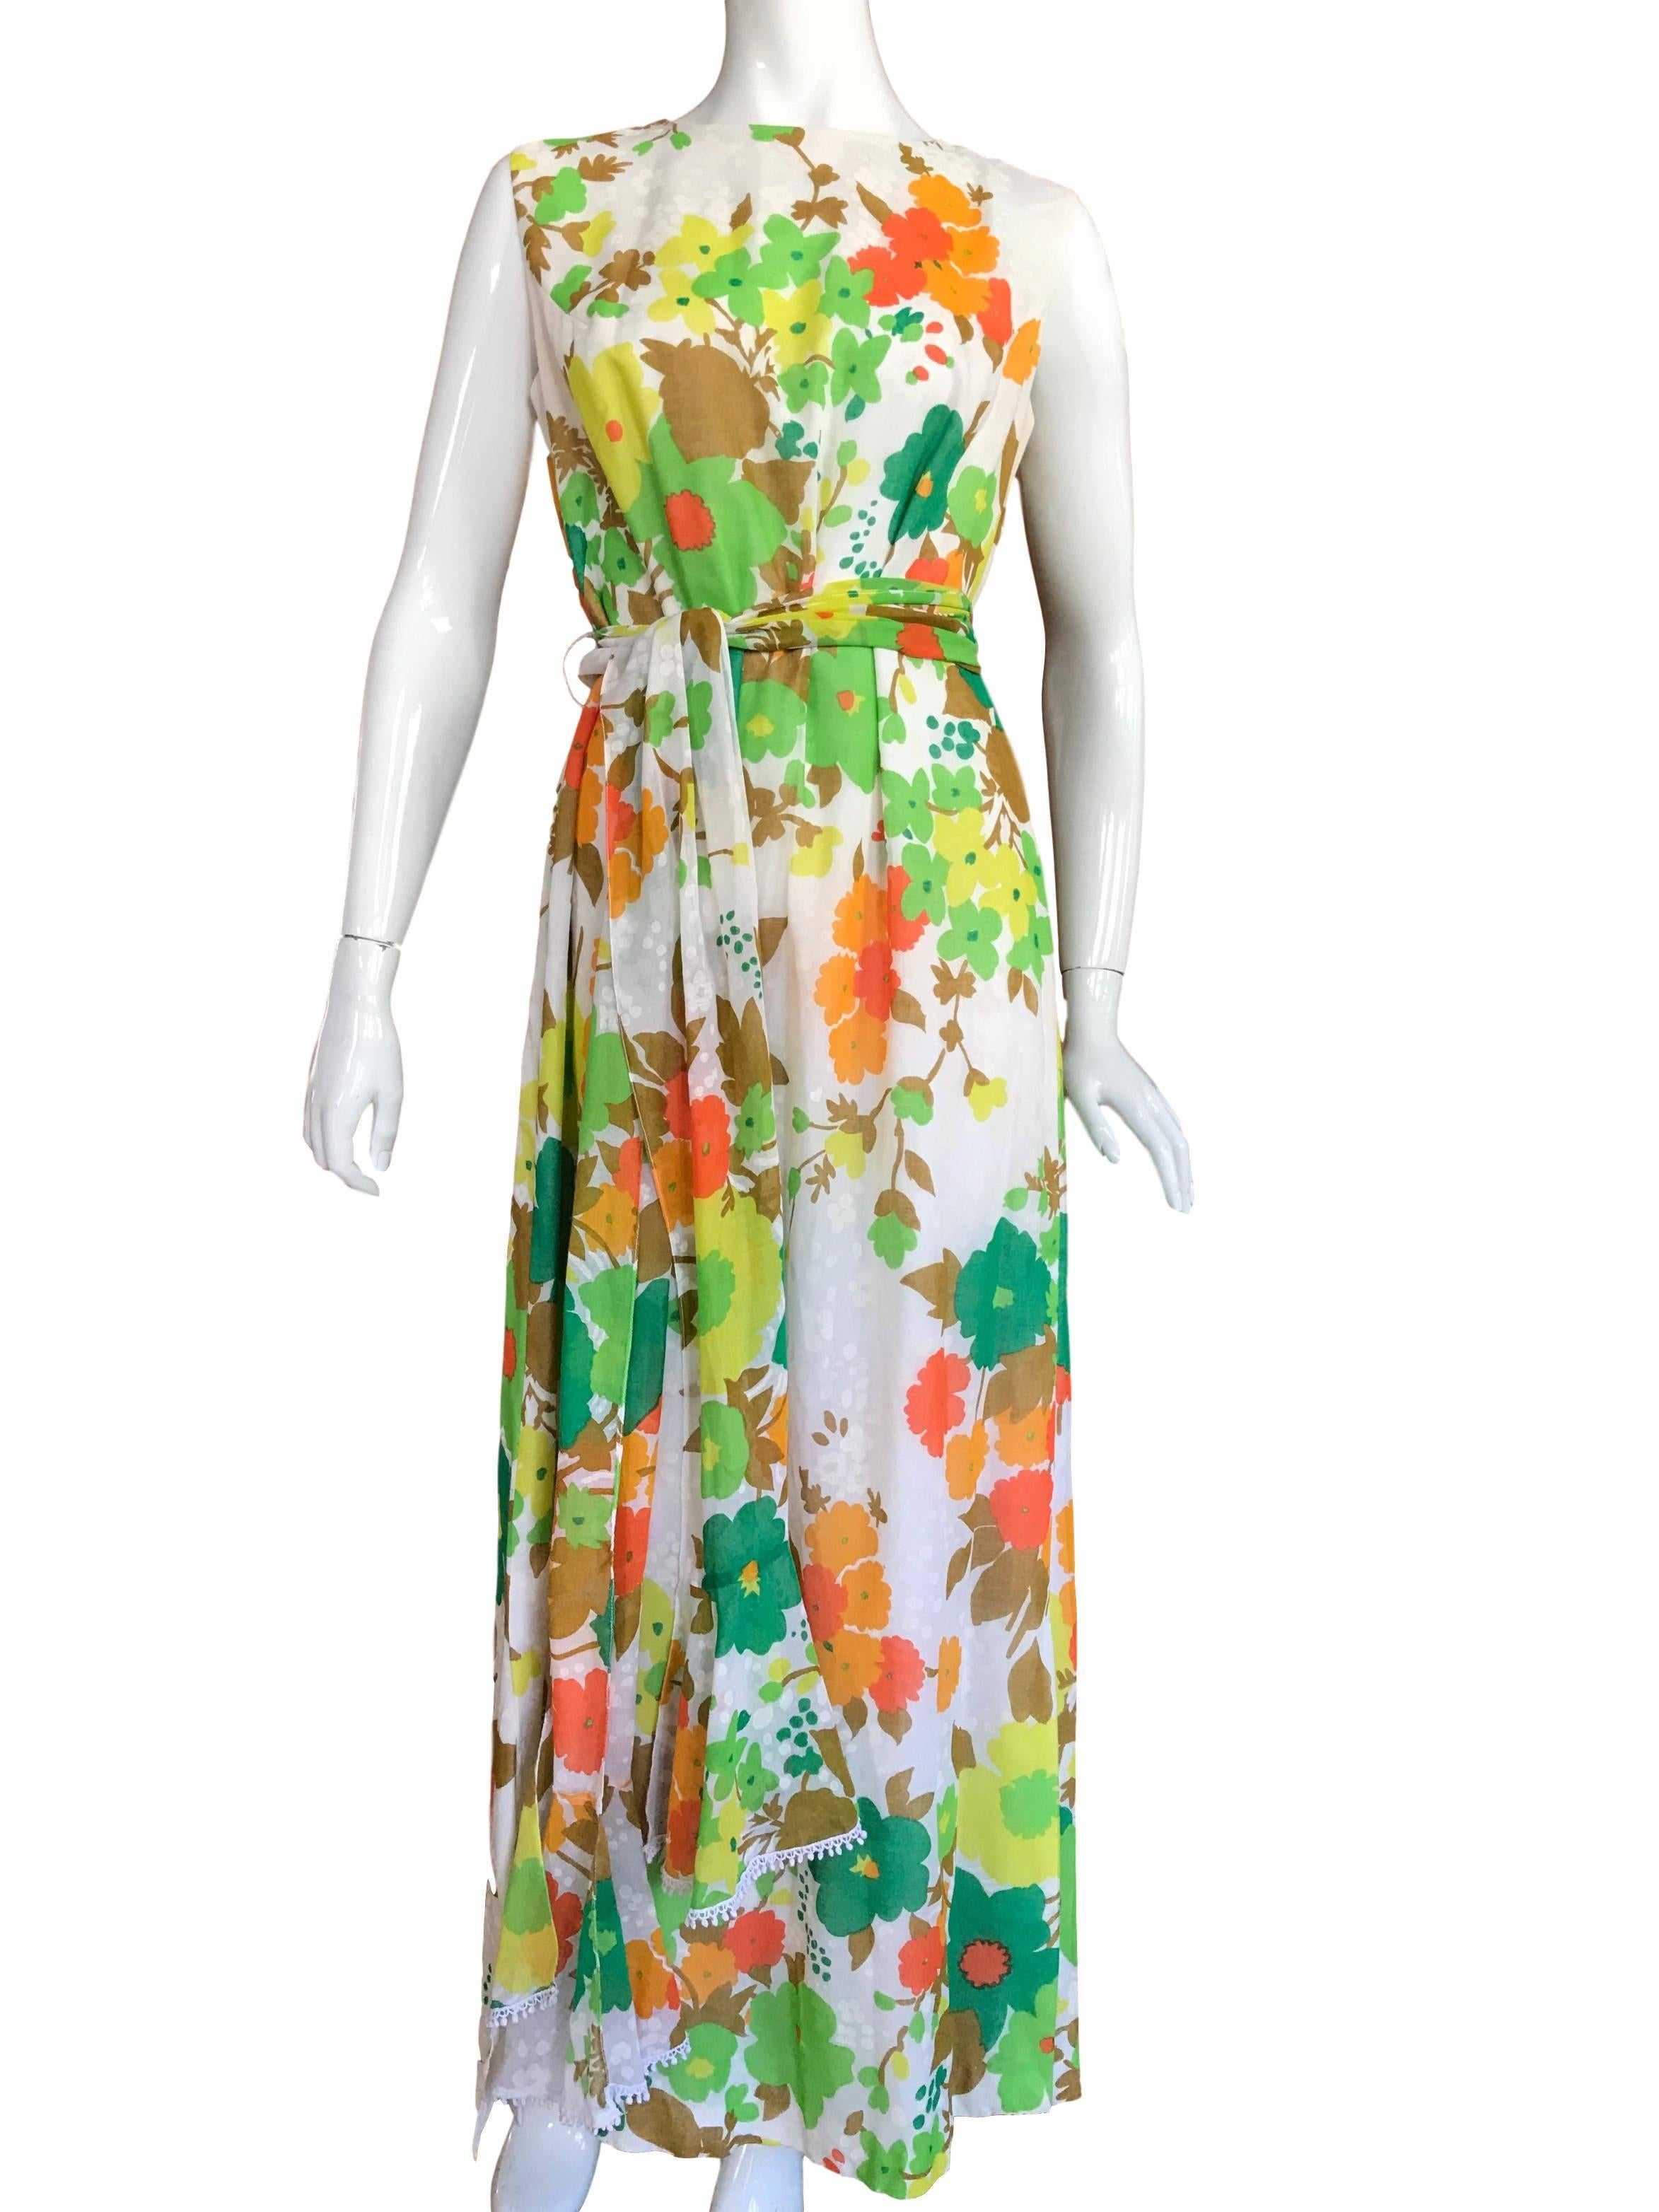 Crestina original late 60s early 70s Terryline and cotton blend 50/50 floral cotton maxi dress. With long sash/belt and back zip fastening.

Excellent condition.

Fits a UK size 12/14 Measuring 20 inches across bust and 58 inches length.